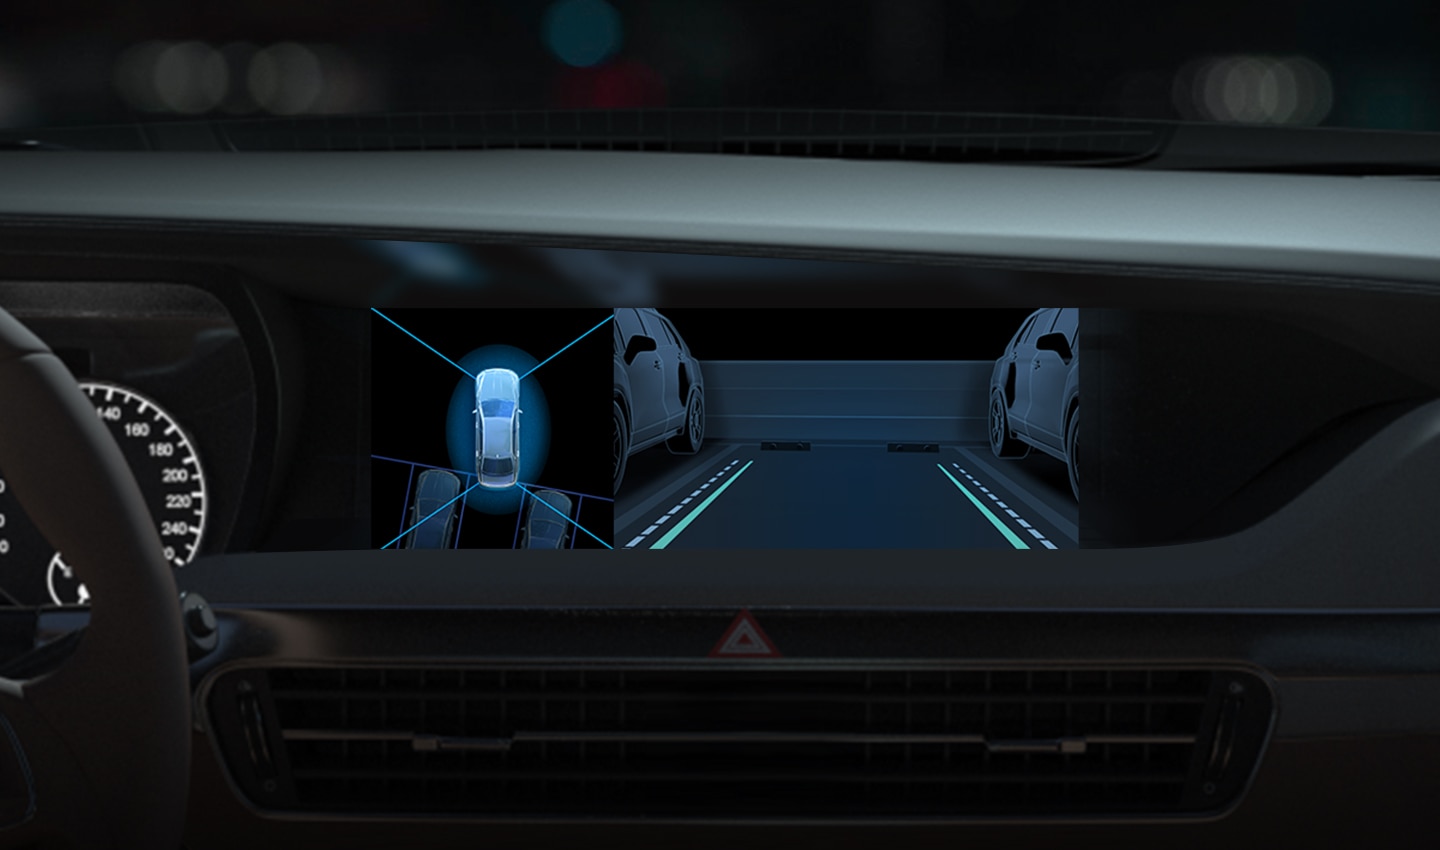 An image showing a vehicle parked through a surround view monitor.